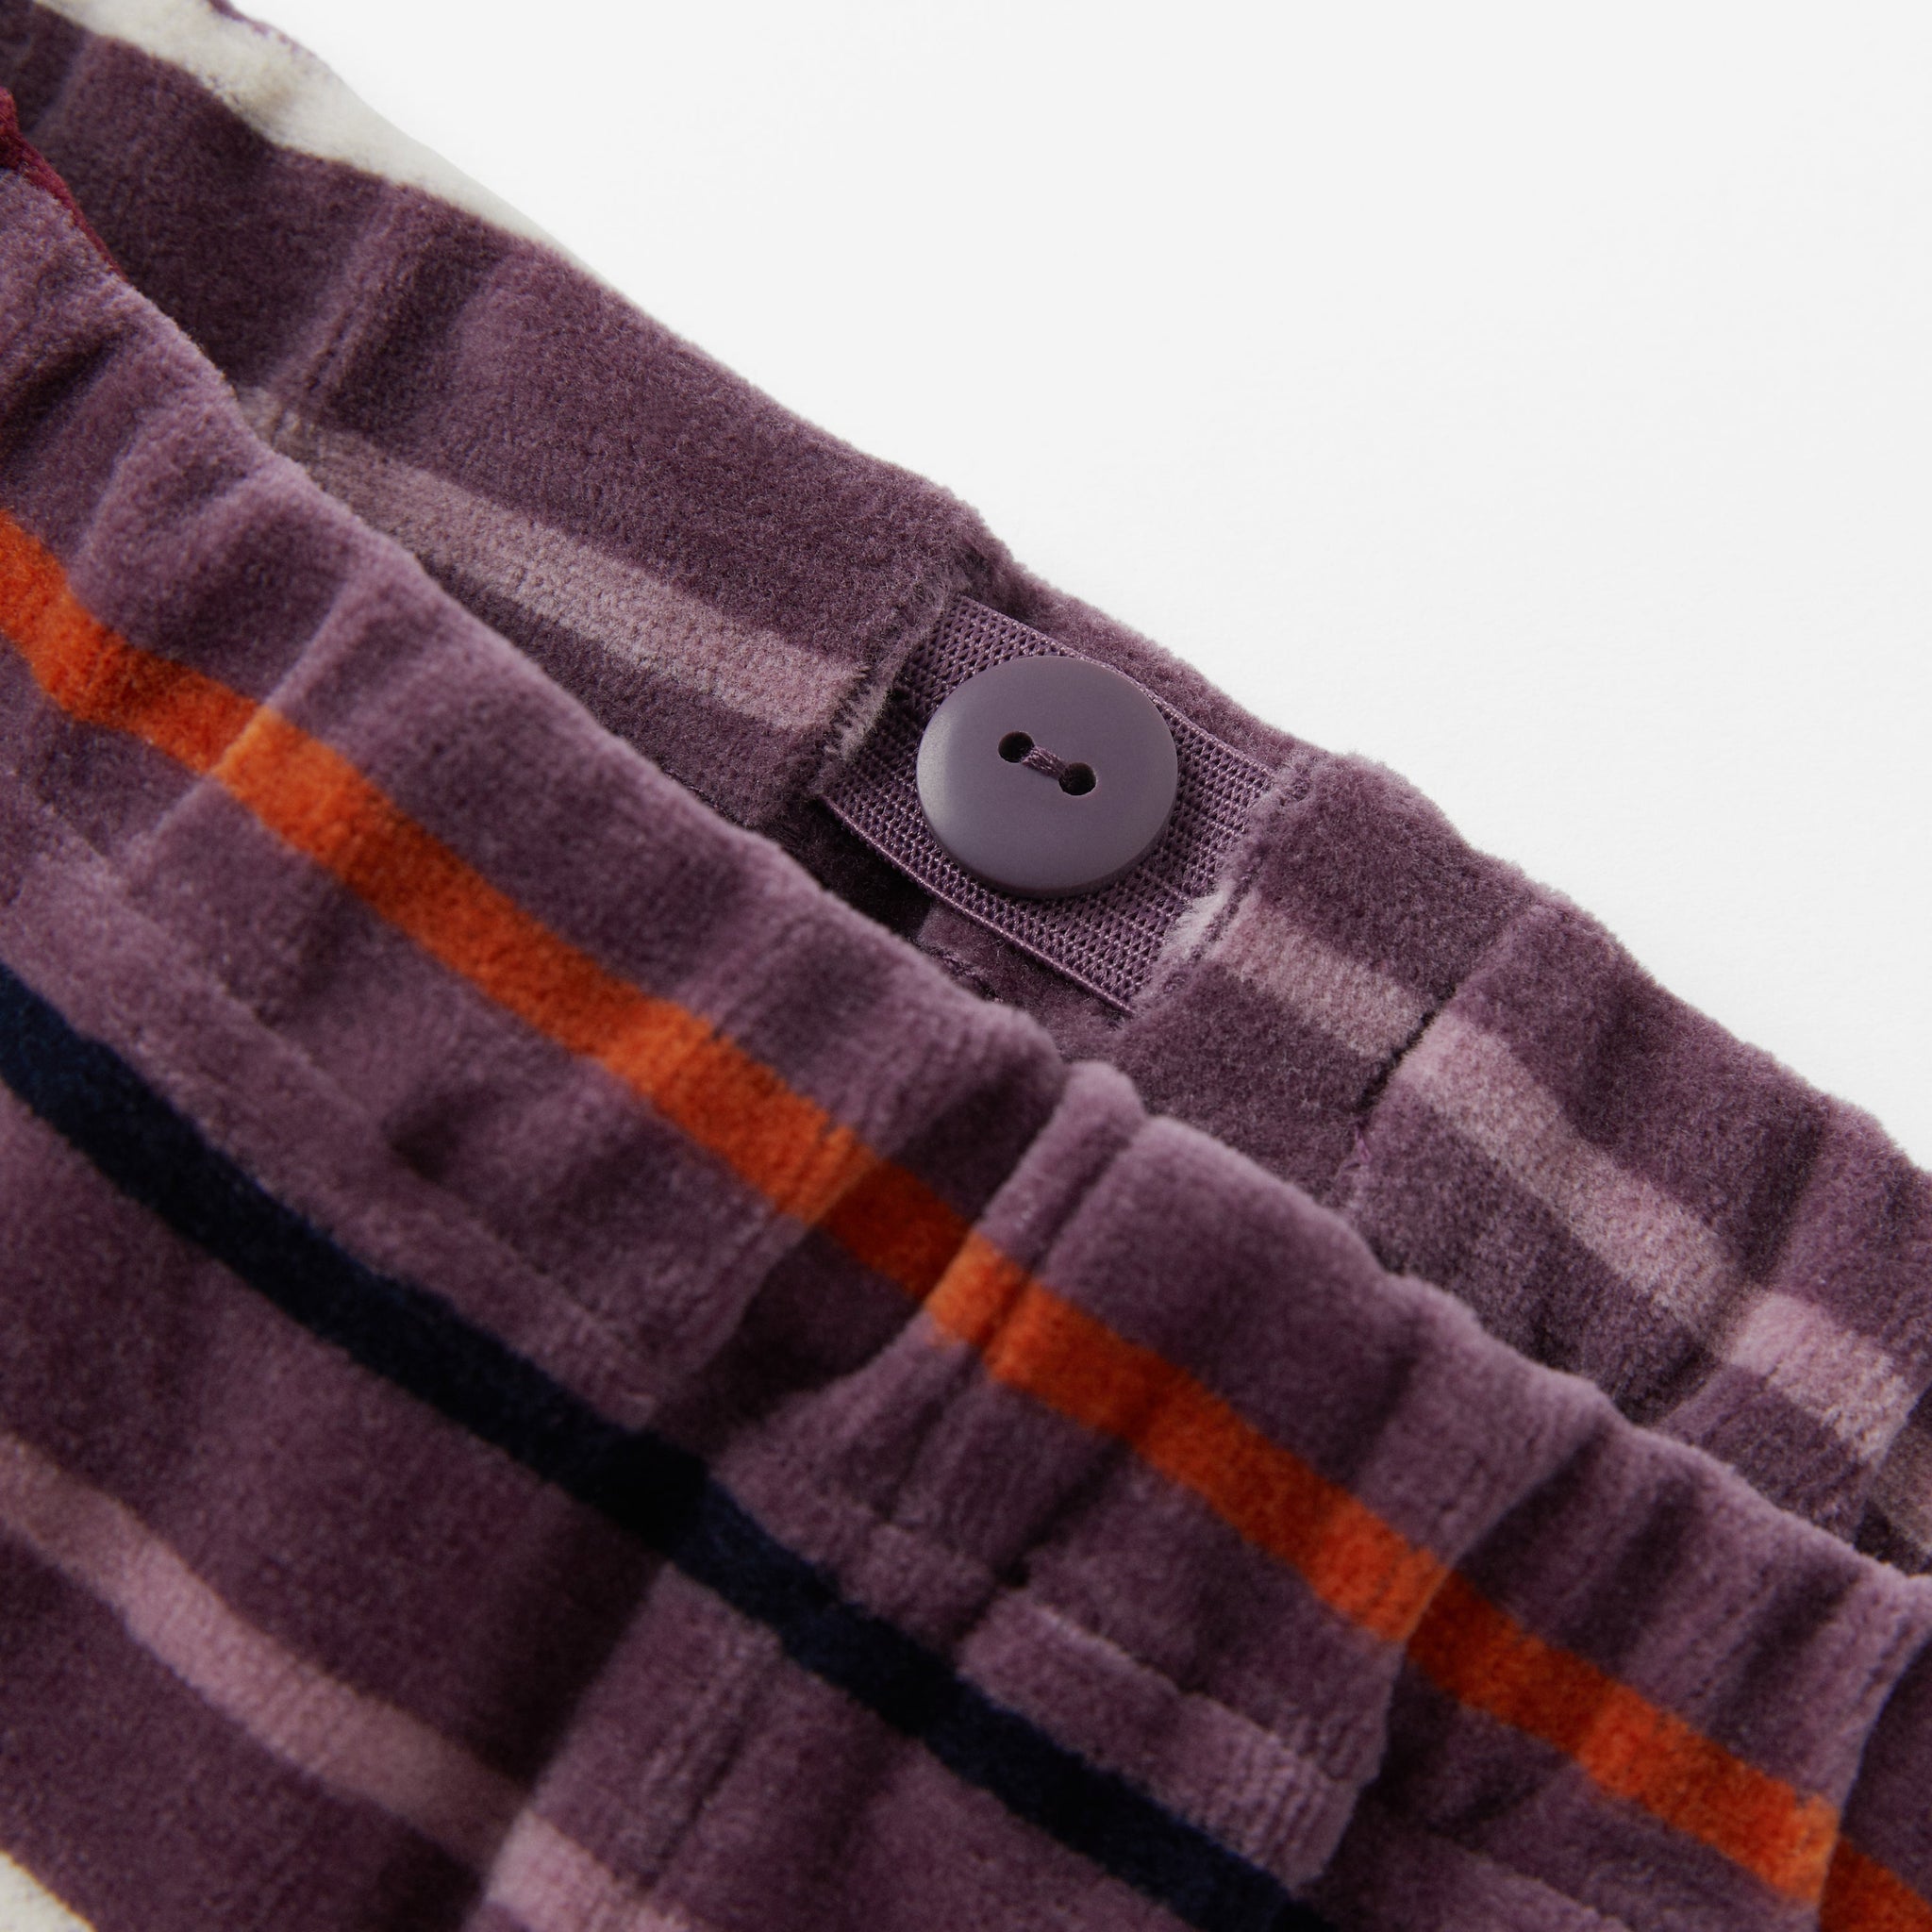 Striped Purple Velour Kids Leggings from the Polarn O. Pyret kidswear collection. Ethically produced kids clothing.